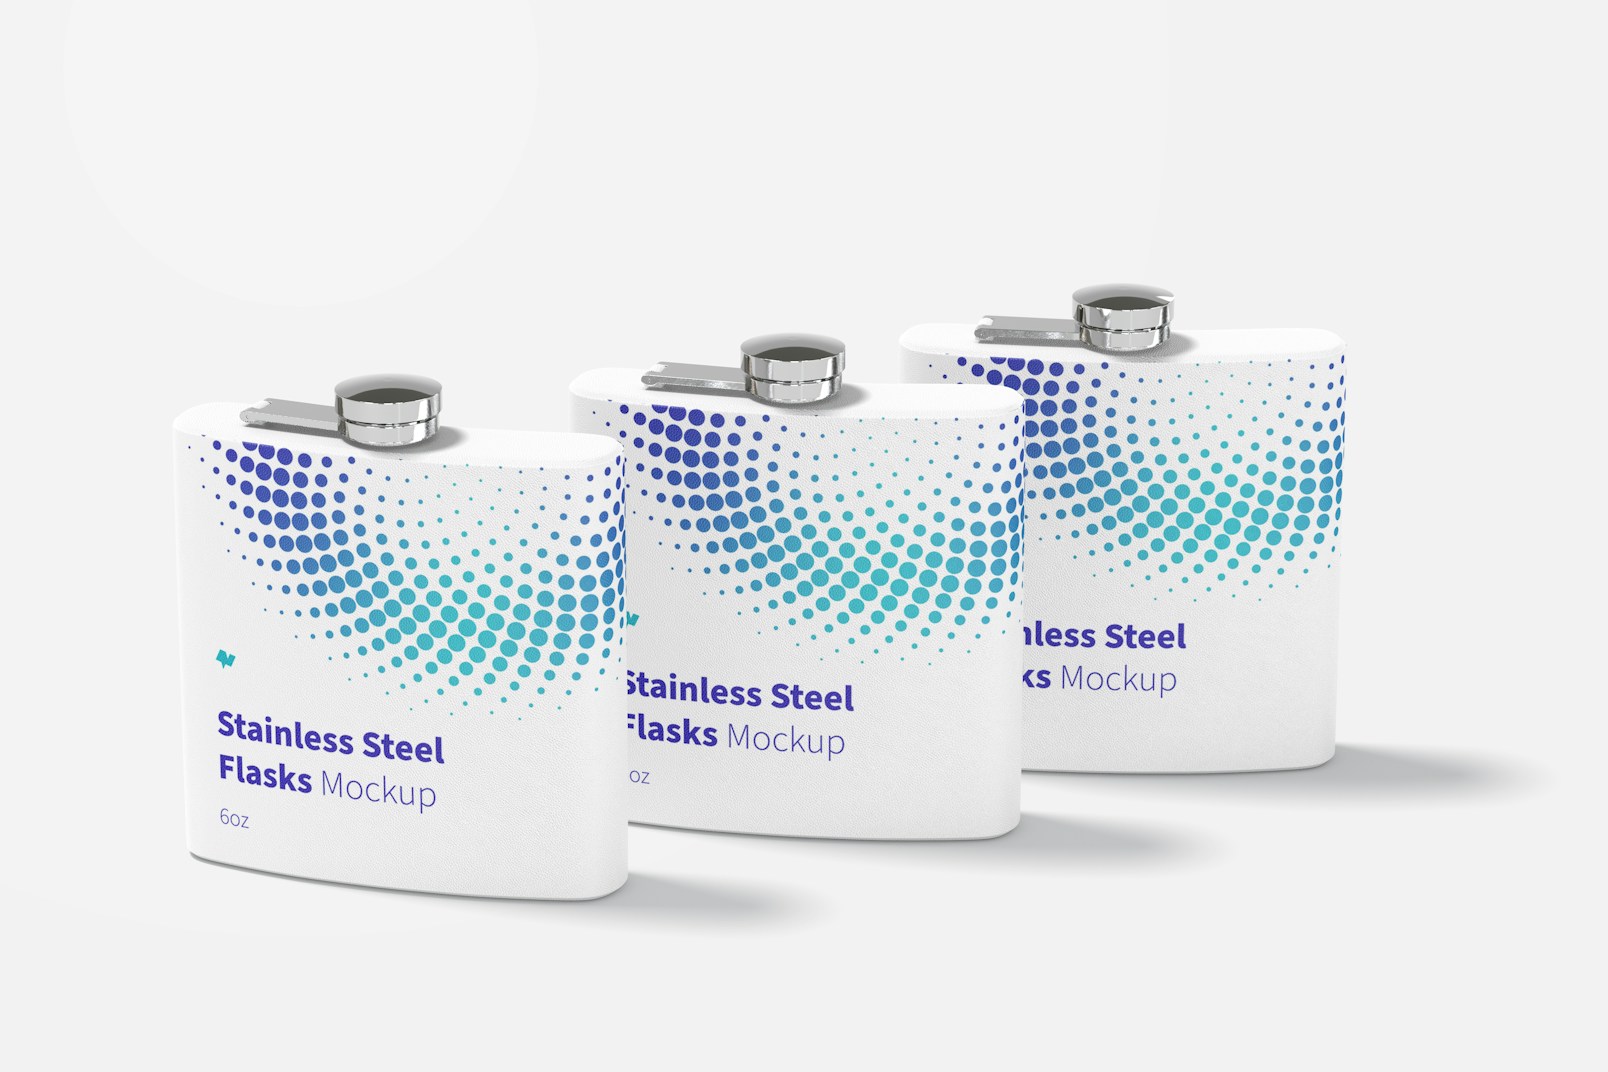 Powder Coated Stainless Steel Flasks Mockup, Perspective